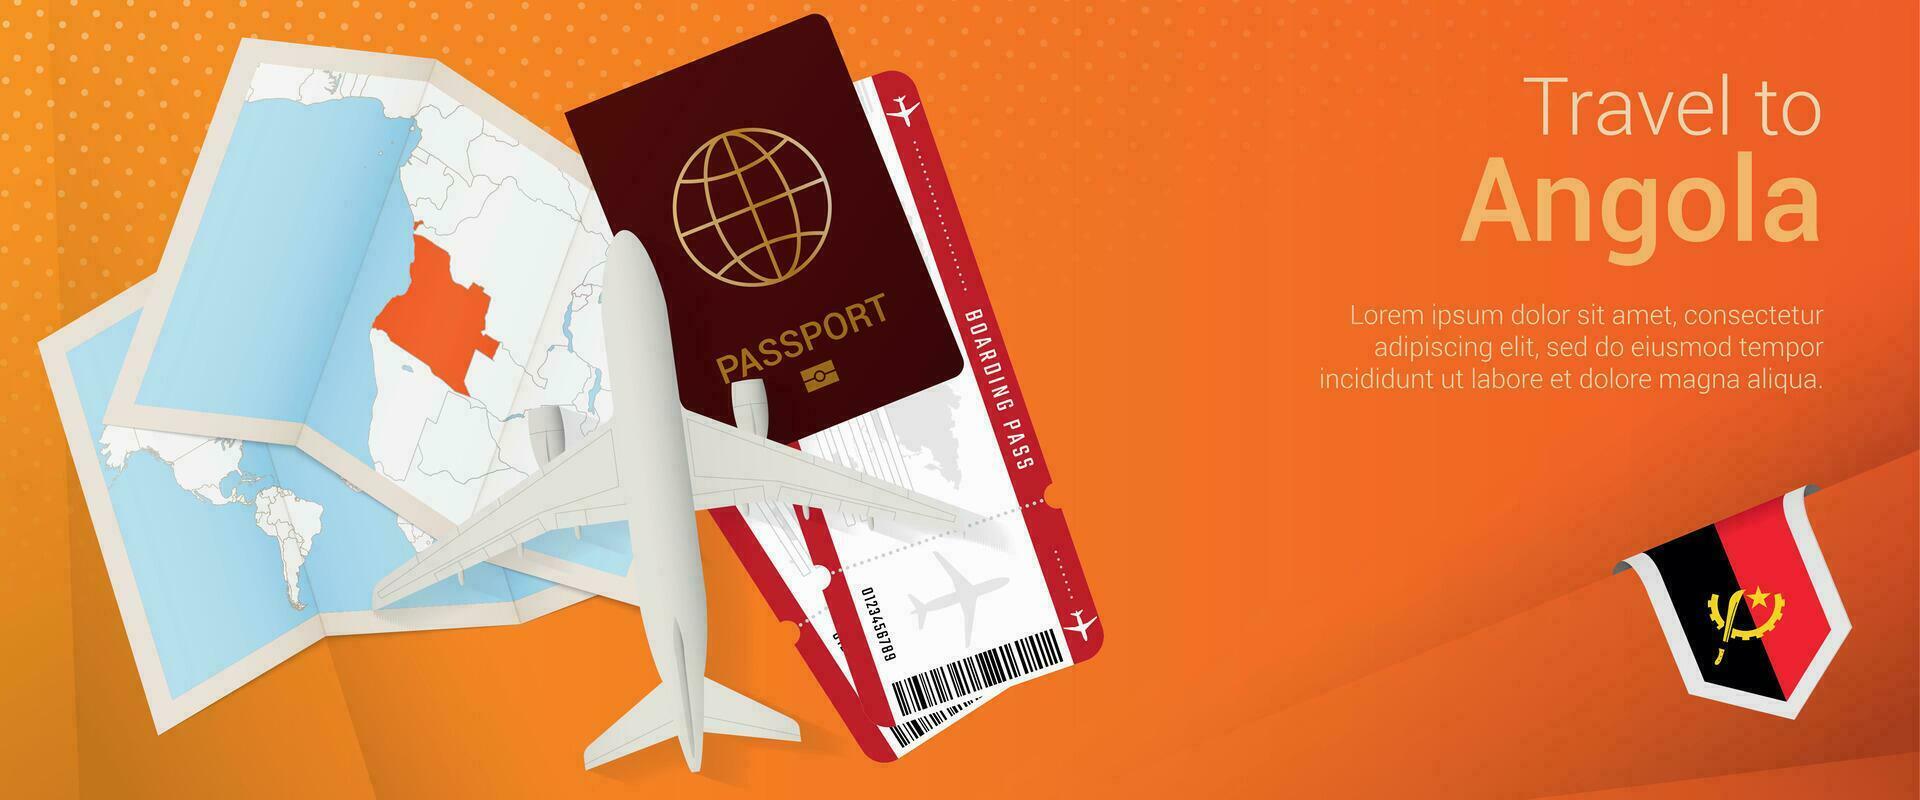 Travel to Angola pop-under banner. Trip banner with passport, tickets, airplane, boarding pass, map and flag of Angola. vector